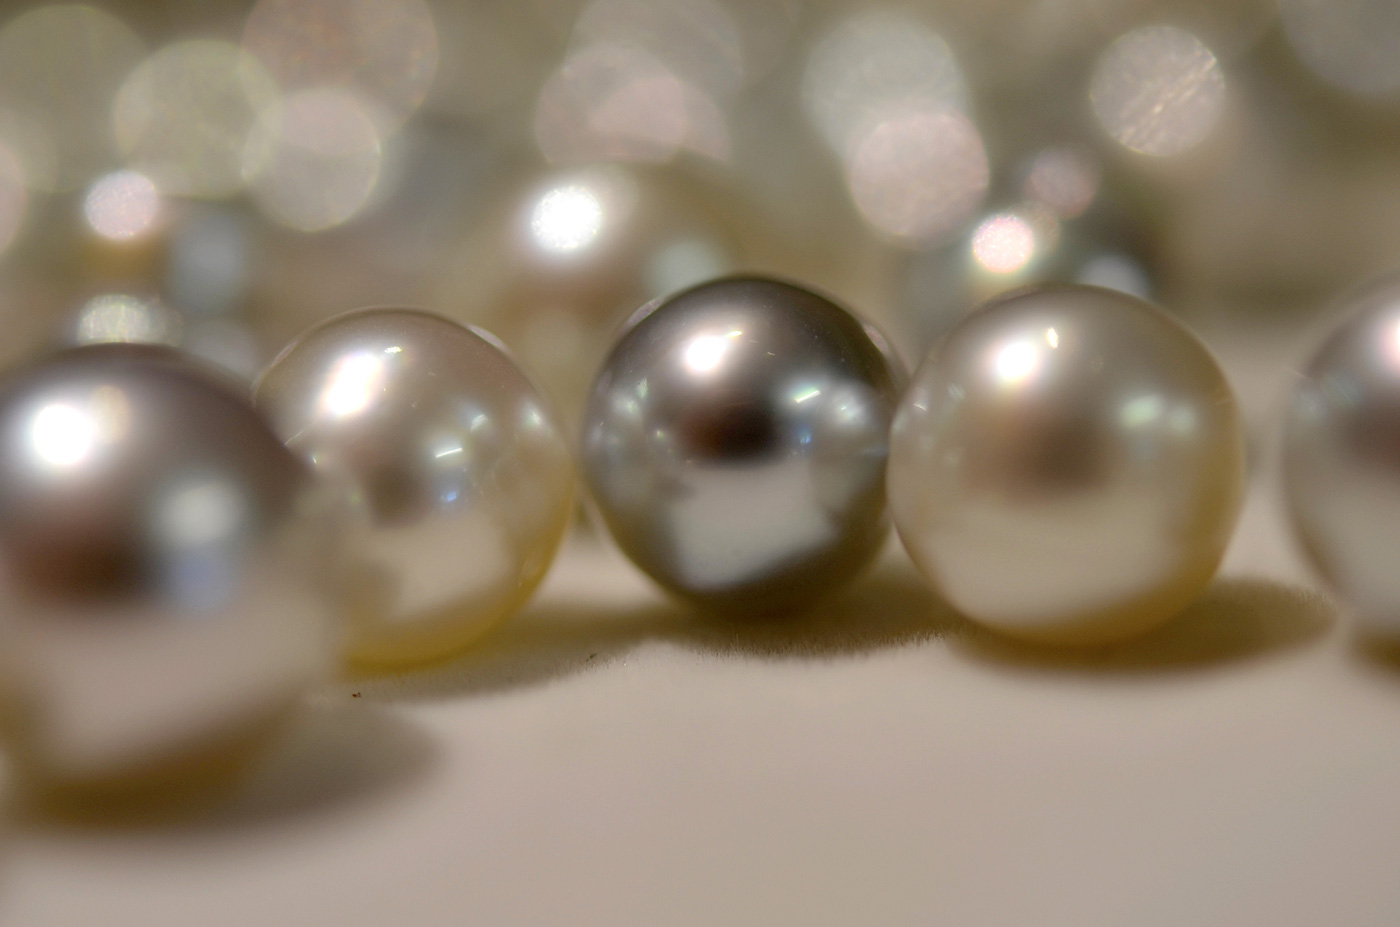 Detailed view of pearls - click to view larger image